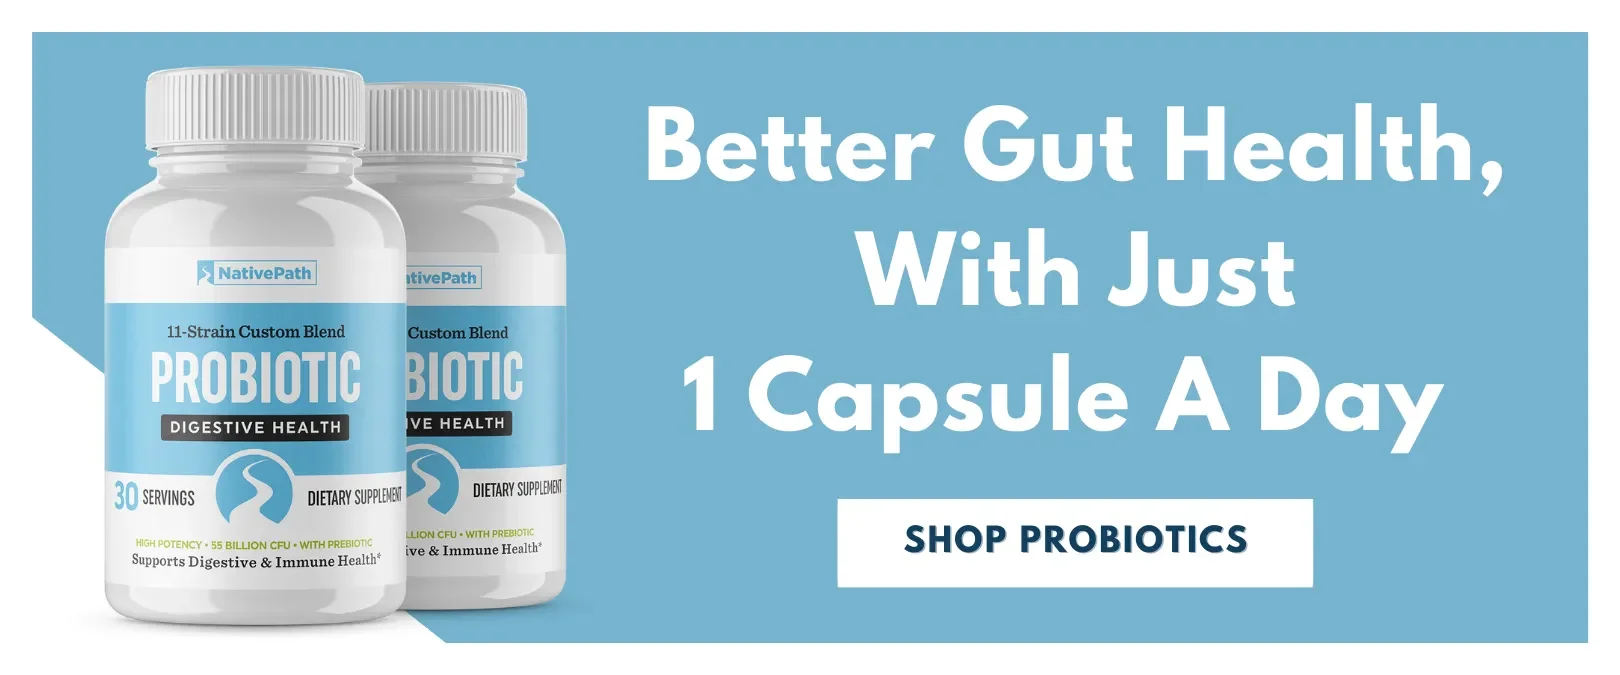 Better Gut Health, With Just 1 Capsule of NativePath Probiotic A Day